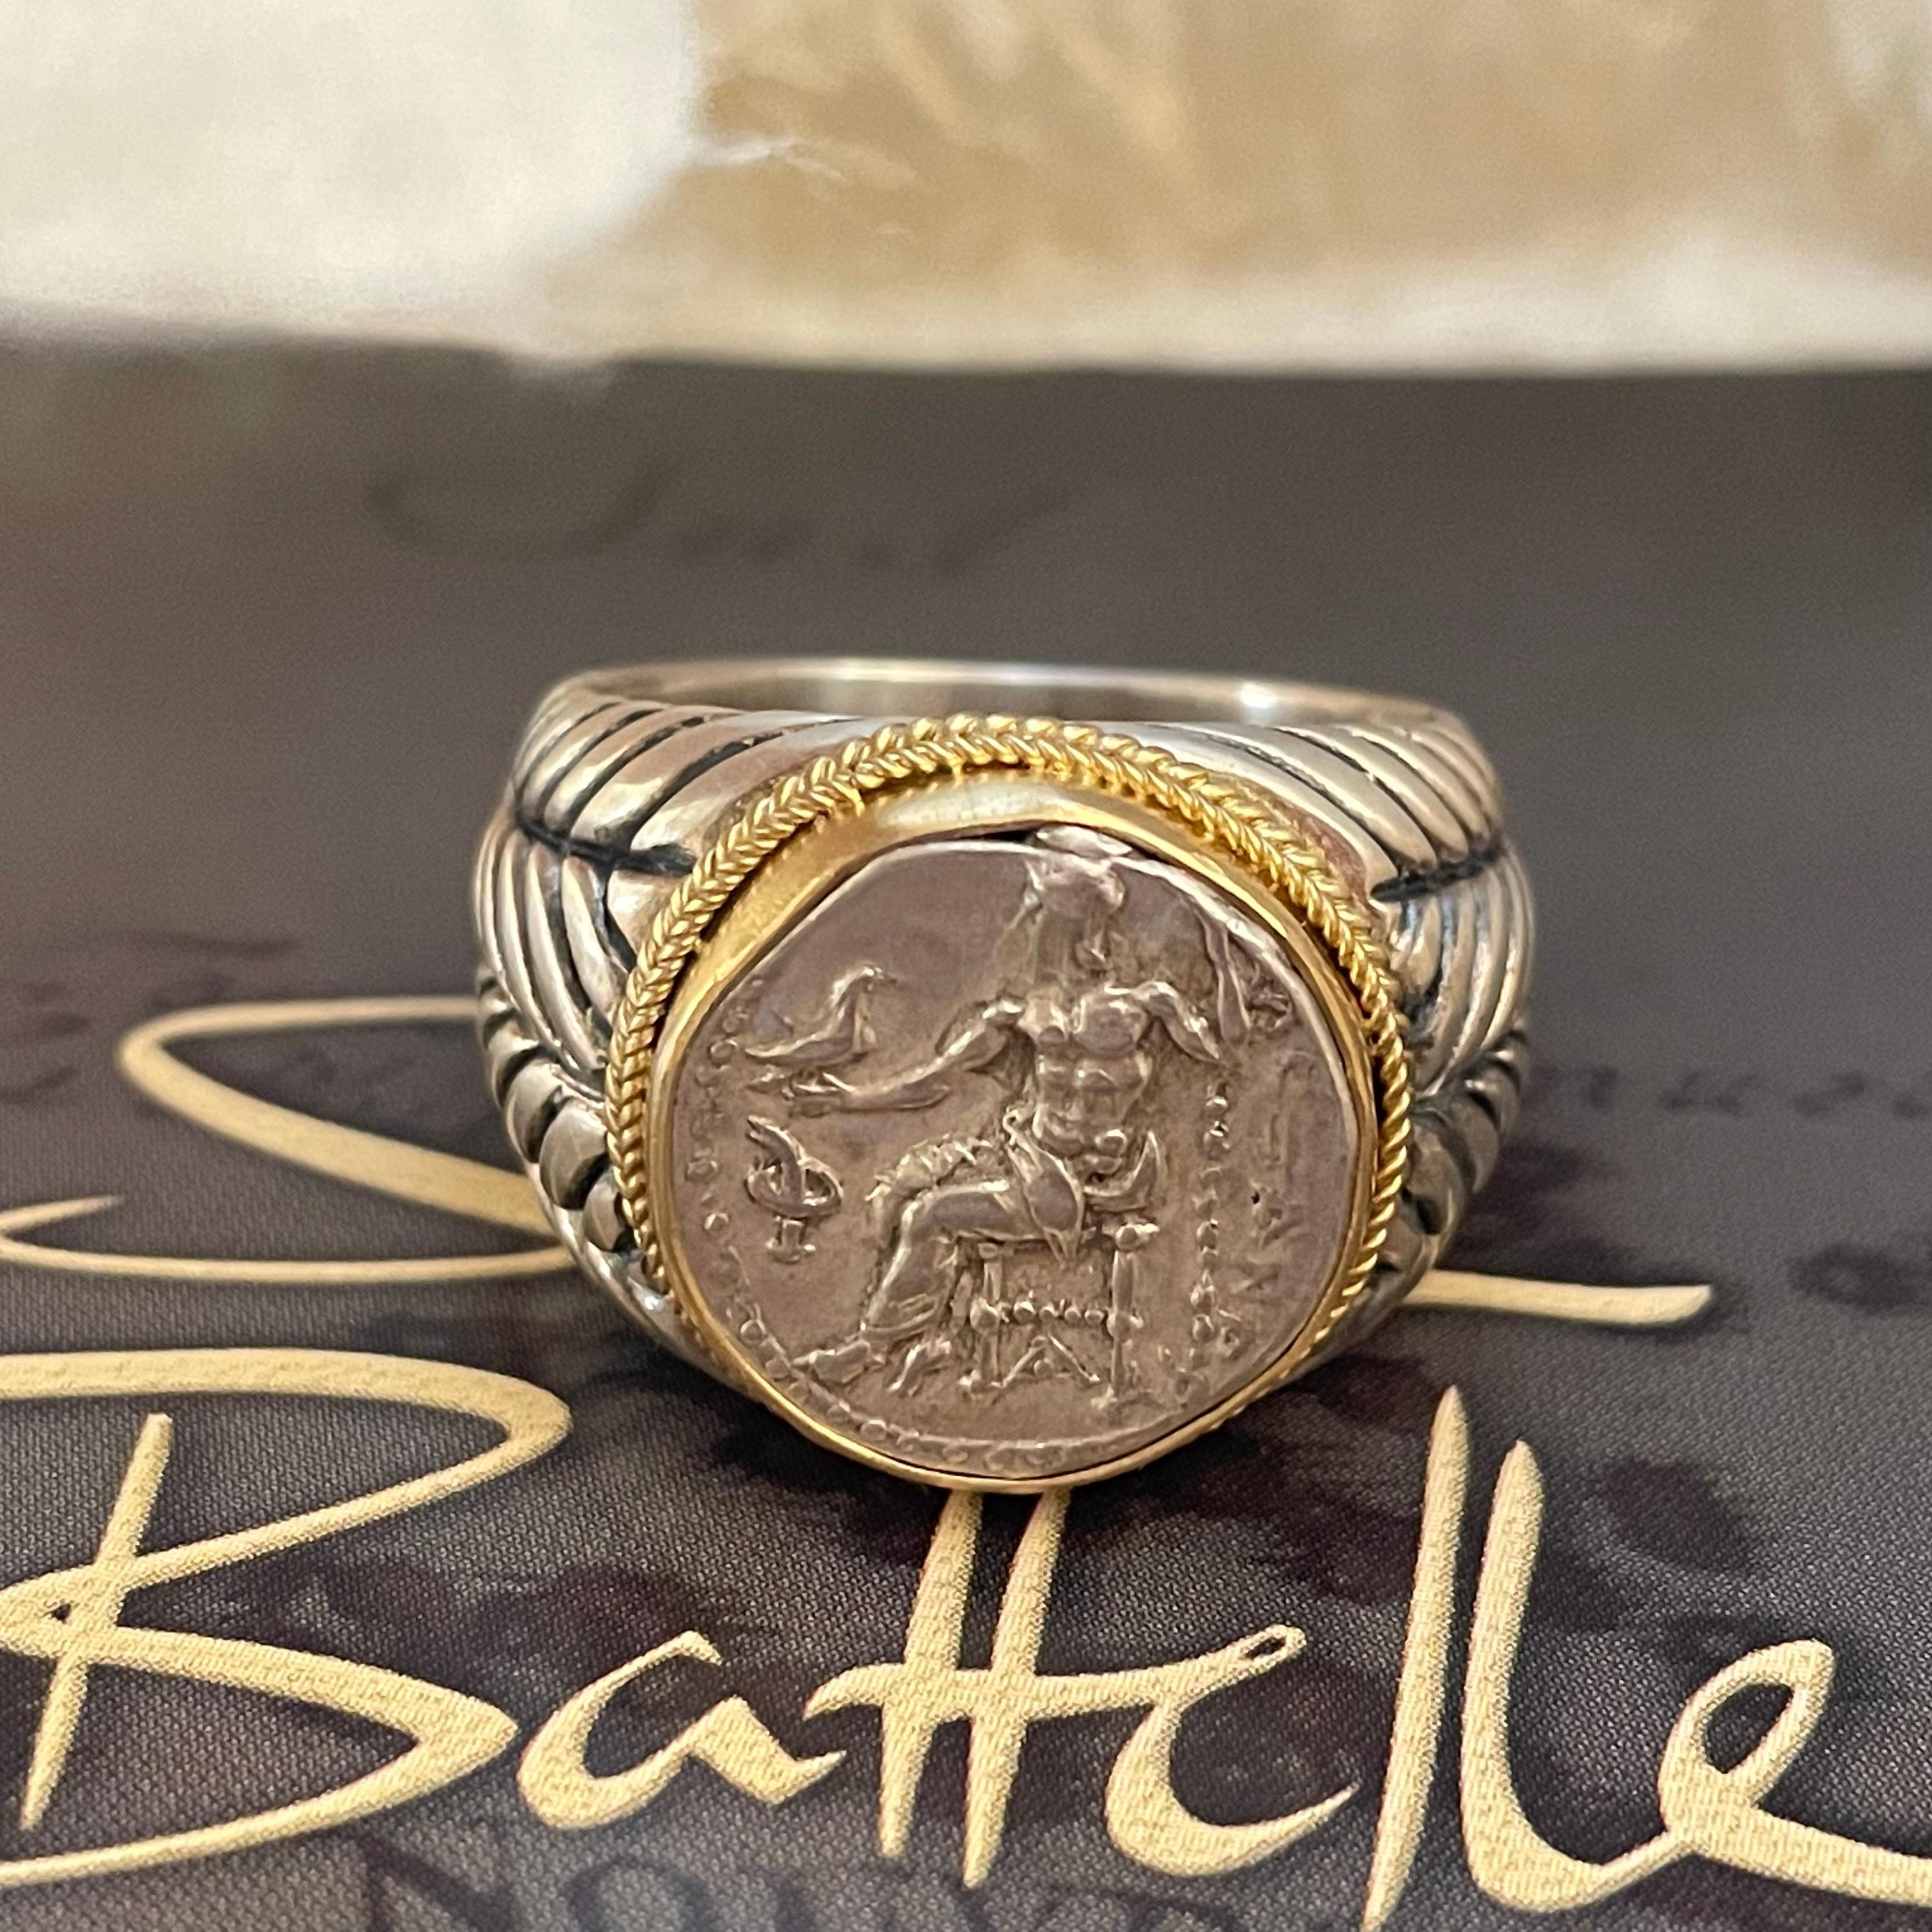 Classical Greek Ancient Greek 4th Century BC Alexander the Great Coin Gold and Silver Mens Ring